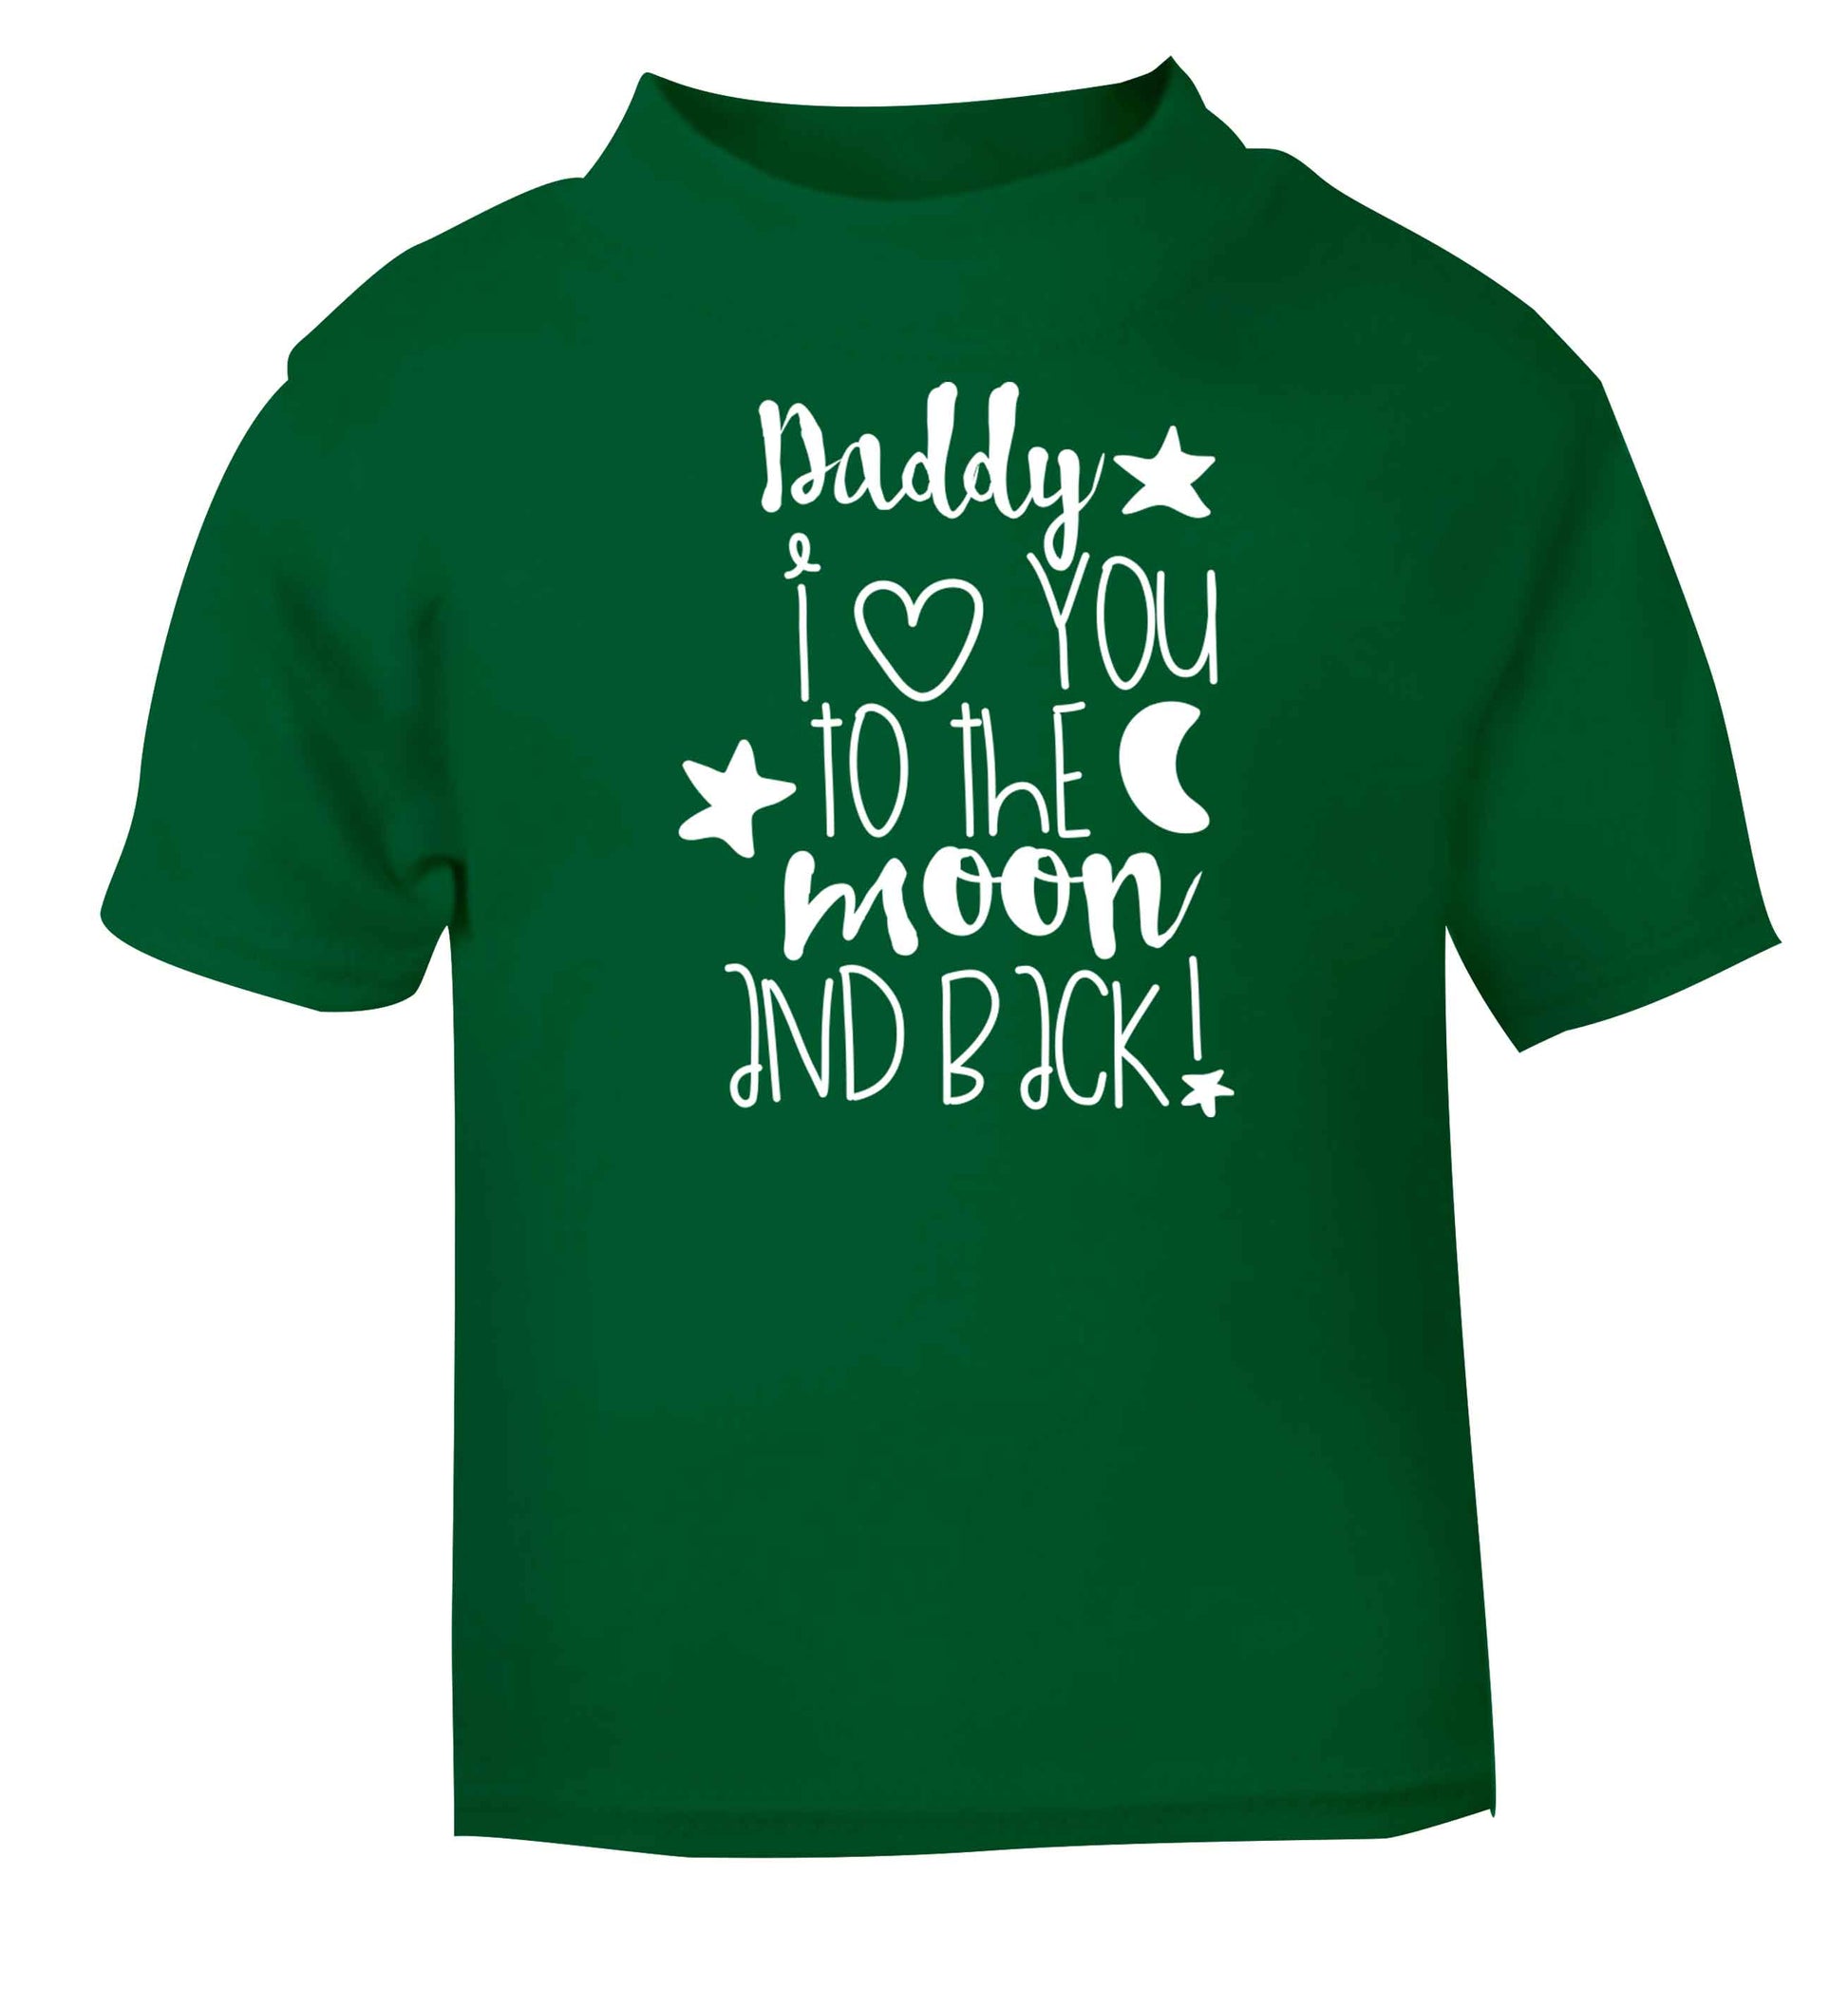 Daddy I love you to the moon and back green baby toddler Tshirt 2 Years